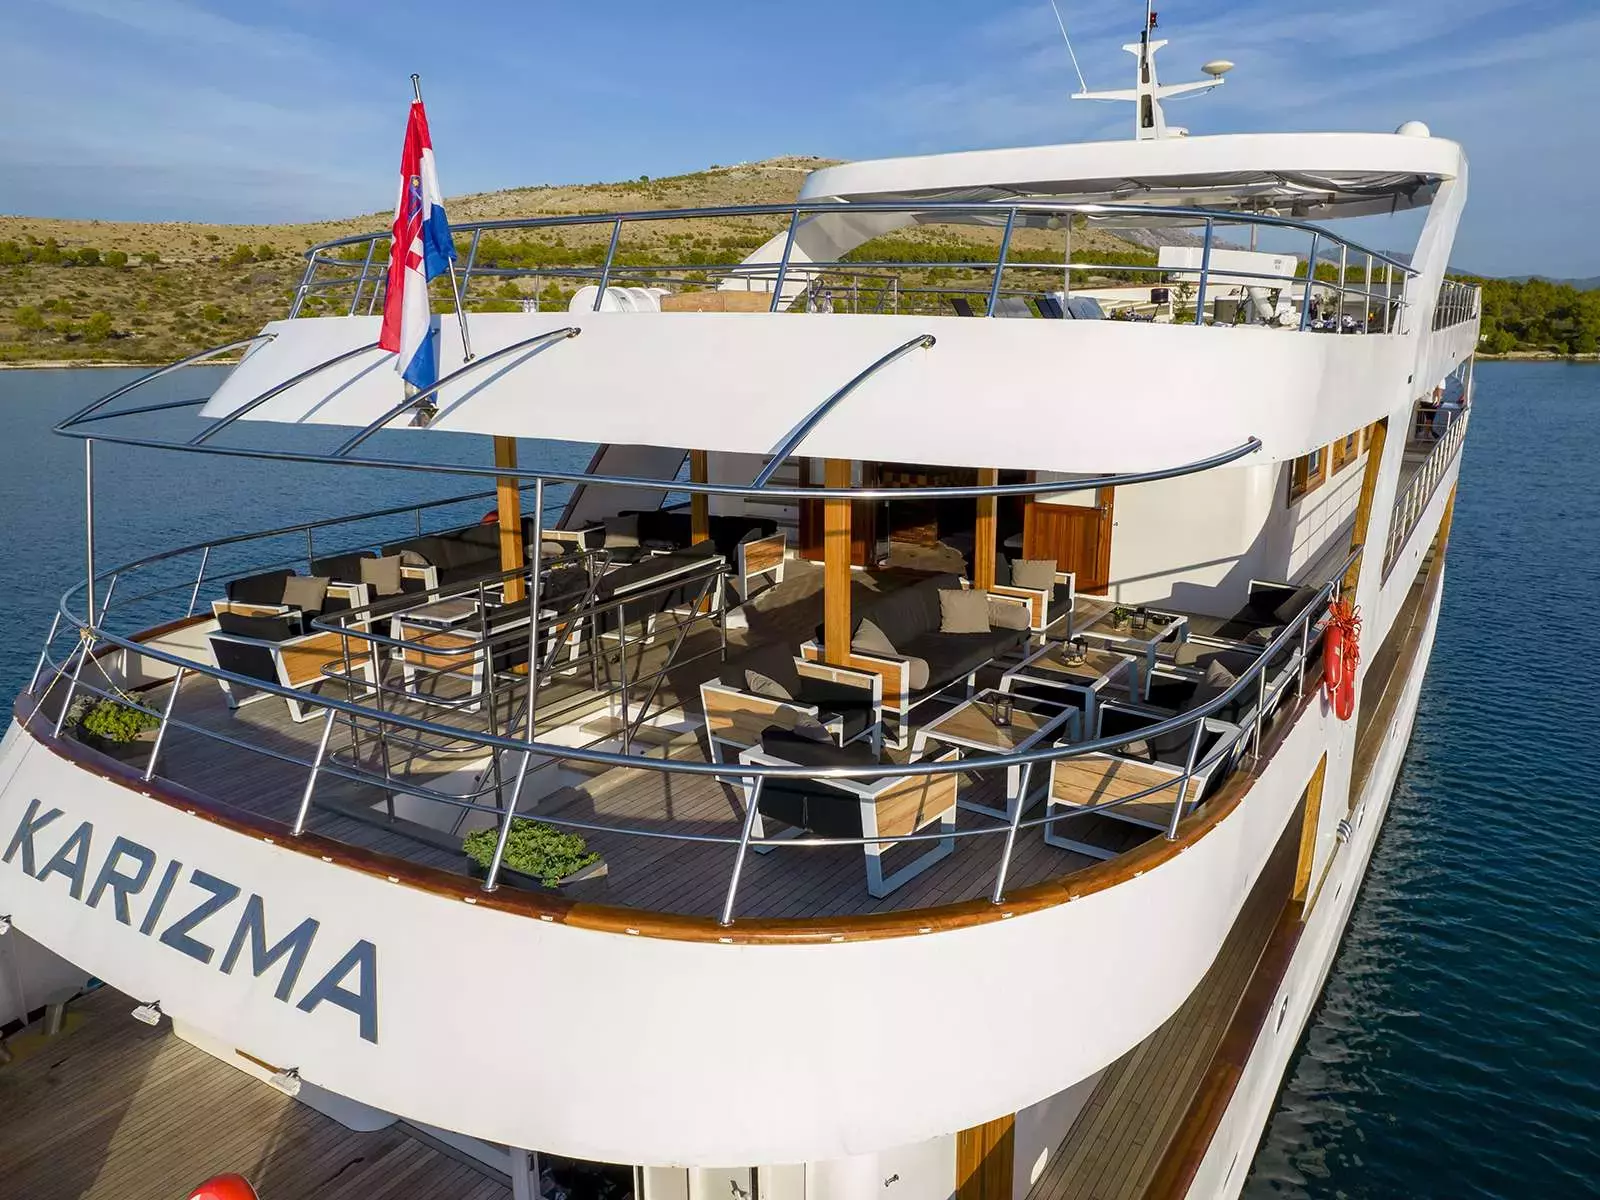 Karizma by Custom Made - Top rates for a Charter of a private Motor Yacht in Montenegro